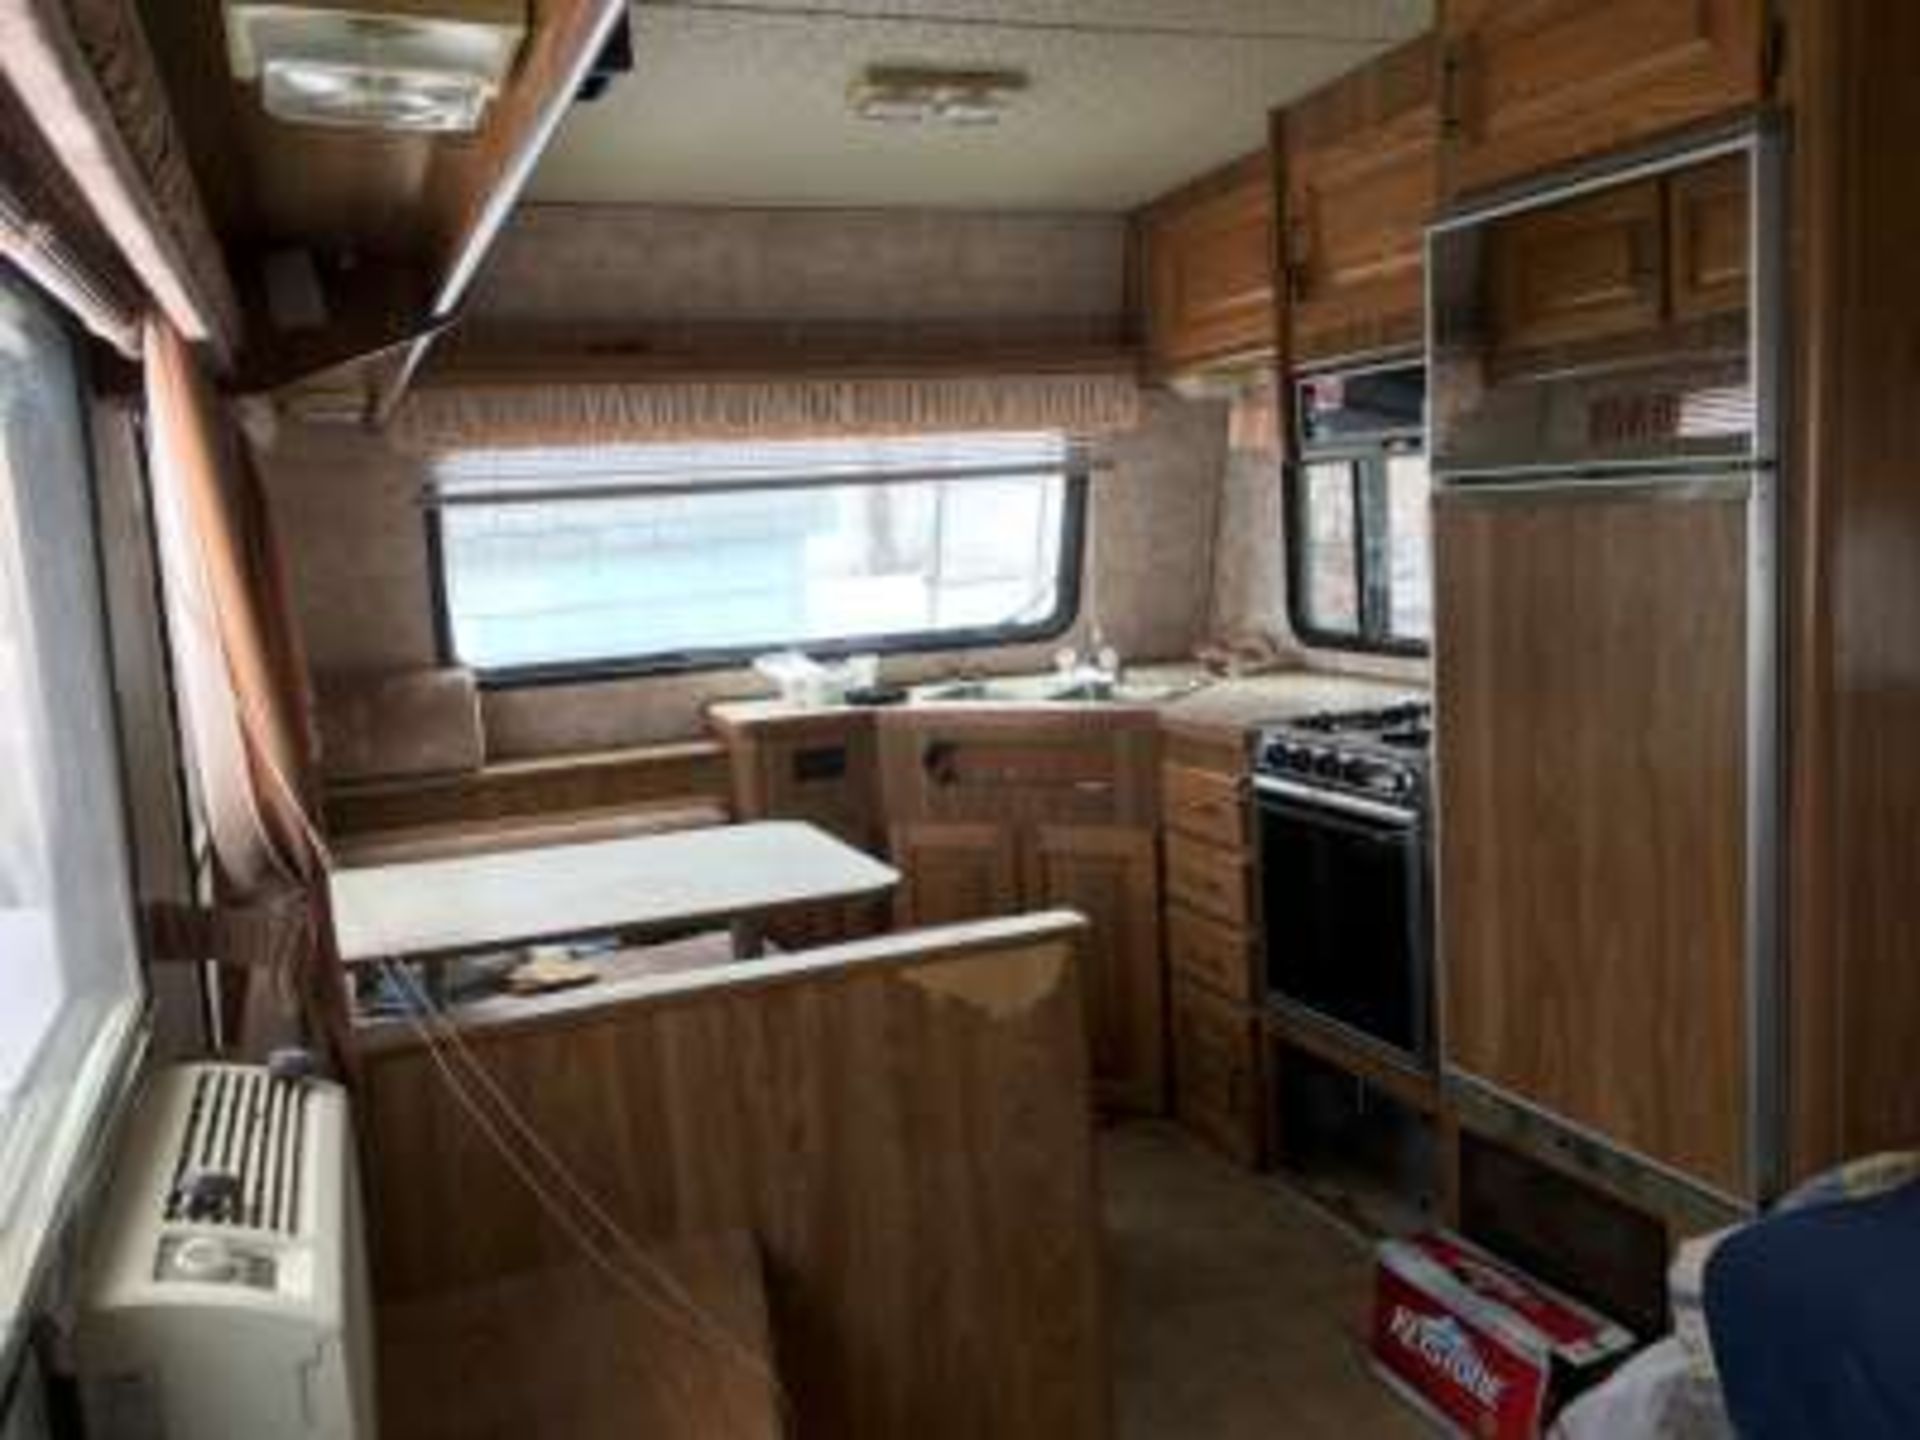 1989 Travel Aire Vangaurd 5th wheel holiday trailer,28ft,new tires, 3pce bath, tandem axle, window - Image 4 of 10